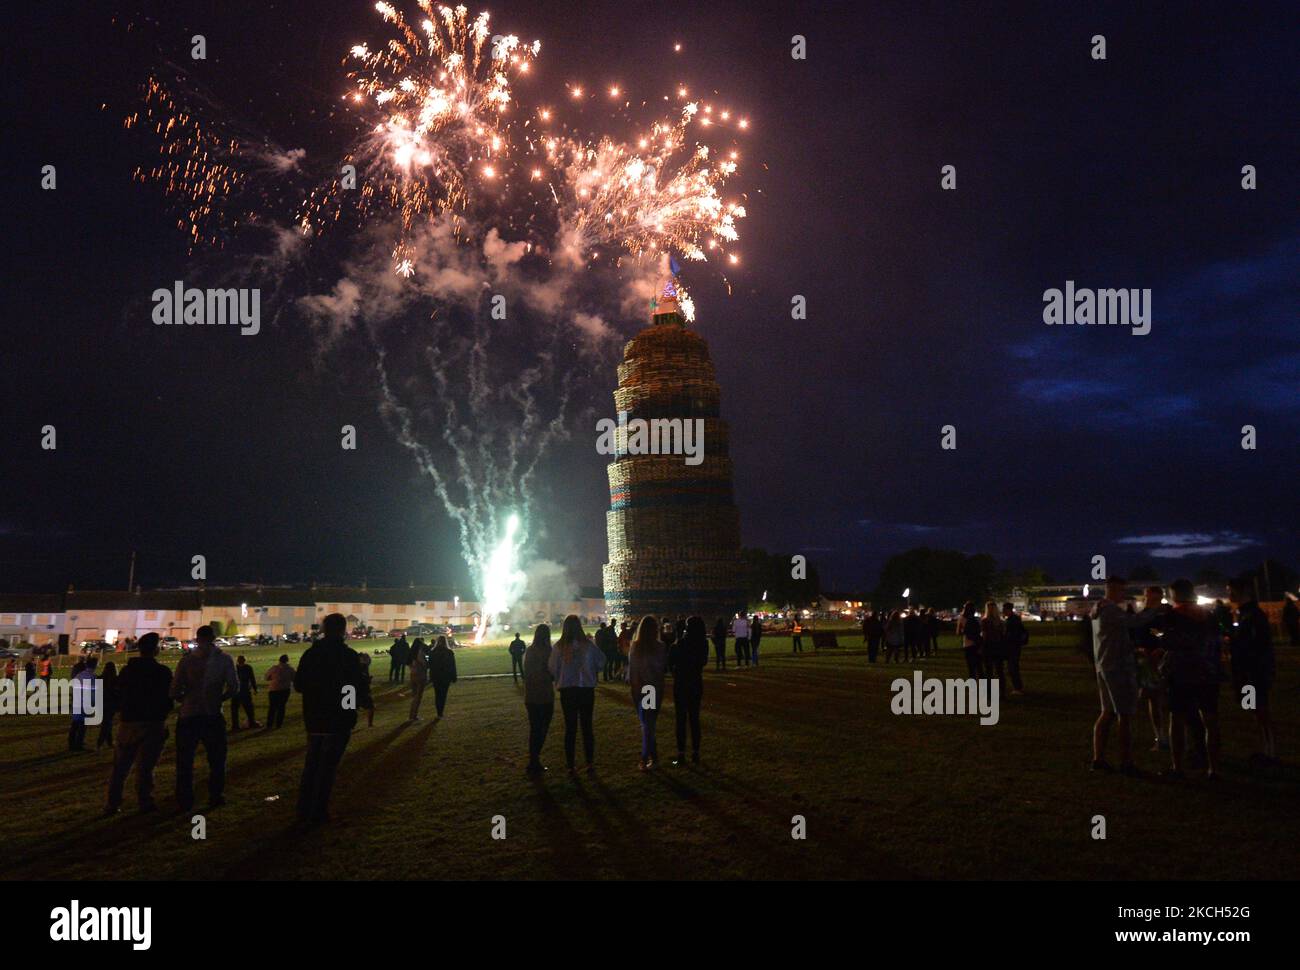 People watch fireworks as they wait for a large bonfire to be lit during the Eleventh Night celebration organized by members of the Loyalist Order in Craigy Hill, Larne. Tonight, large bonfires are lit in many Protestant loyalist neighbourhoods of Northern Ireland. Bonfires were originally lit to celebrate the Glorious Revolution (1688) and victory of Protestant king William of Orange over Catholic king James II at the Battle of the Boyne (1690), which began the Protestant Ascendancy in Ireland. On Monday, 12 July 2021, in Larne, County Antrim, Northern Ireland (Photo by Artur Widak/NurPhoto) Stock Photo